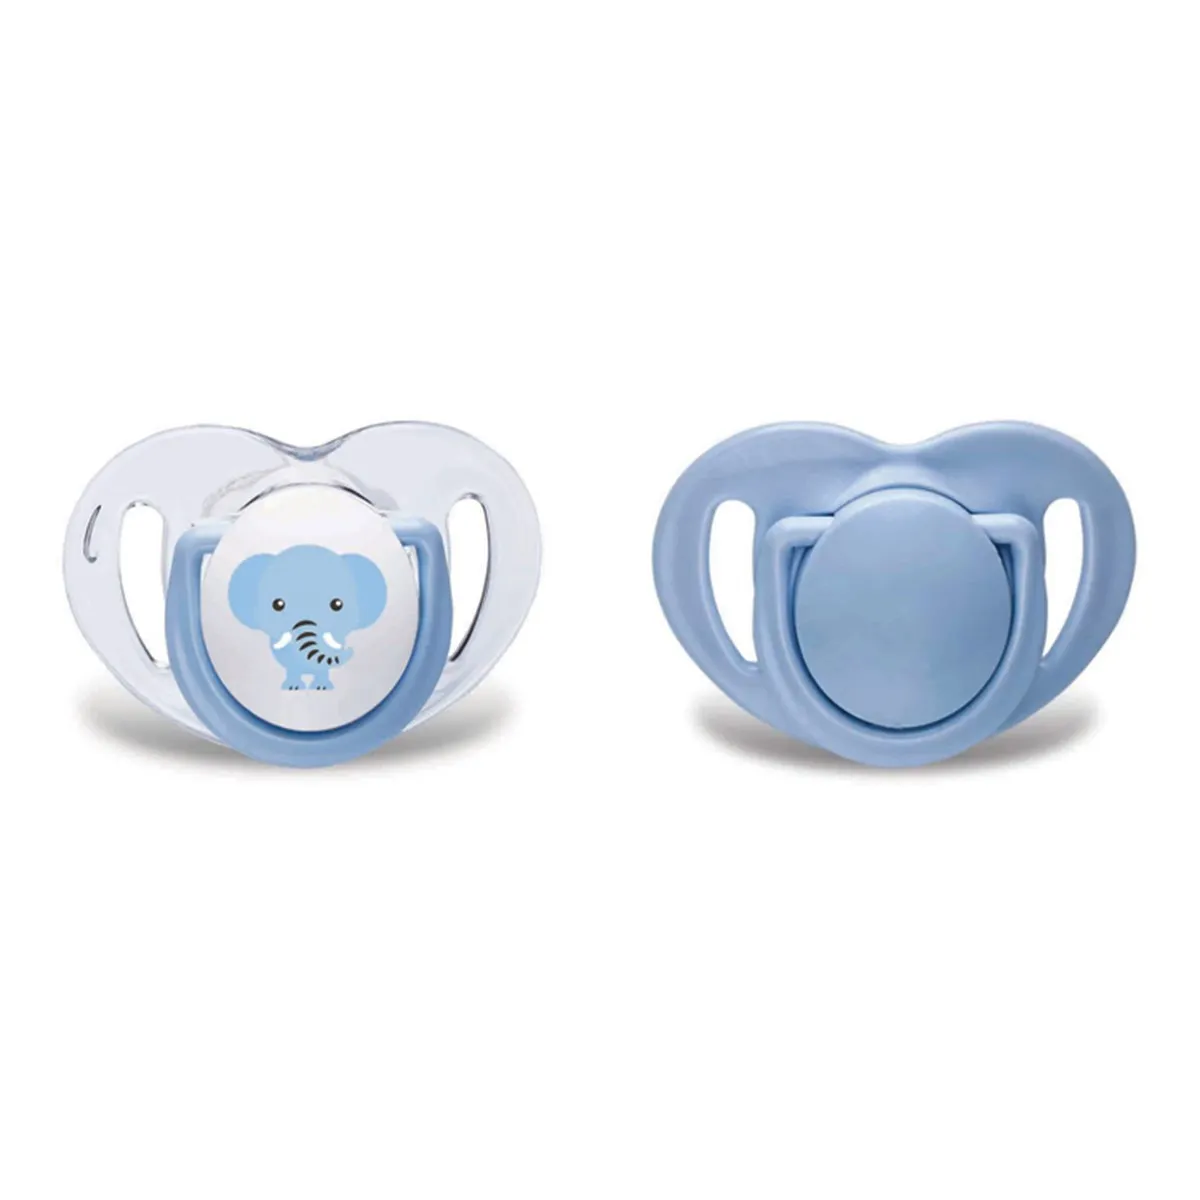 Maajoo silicone orthodontic double pacifier blue elephant/12 months